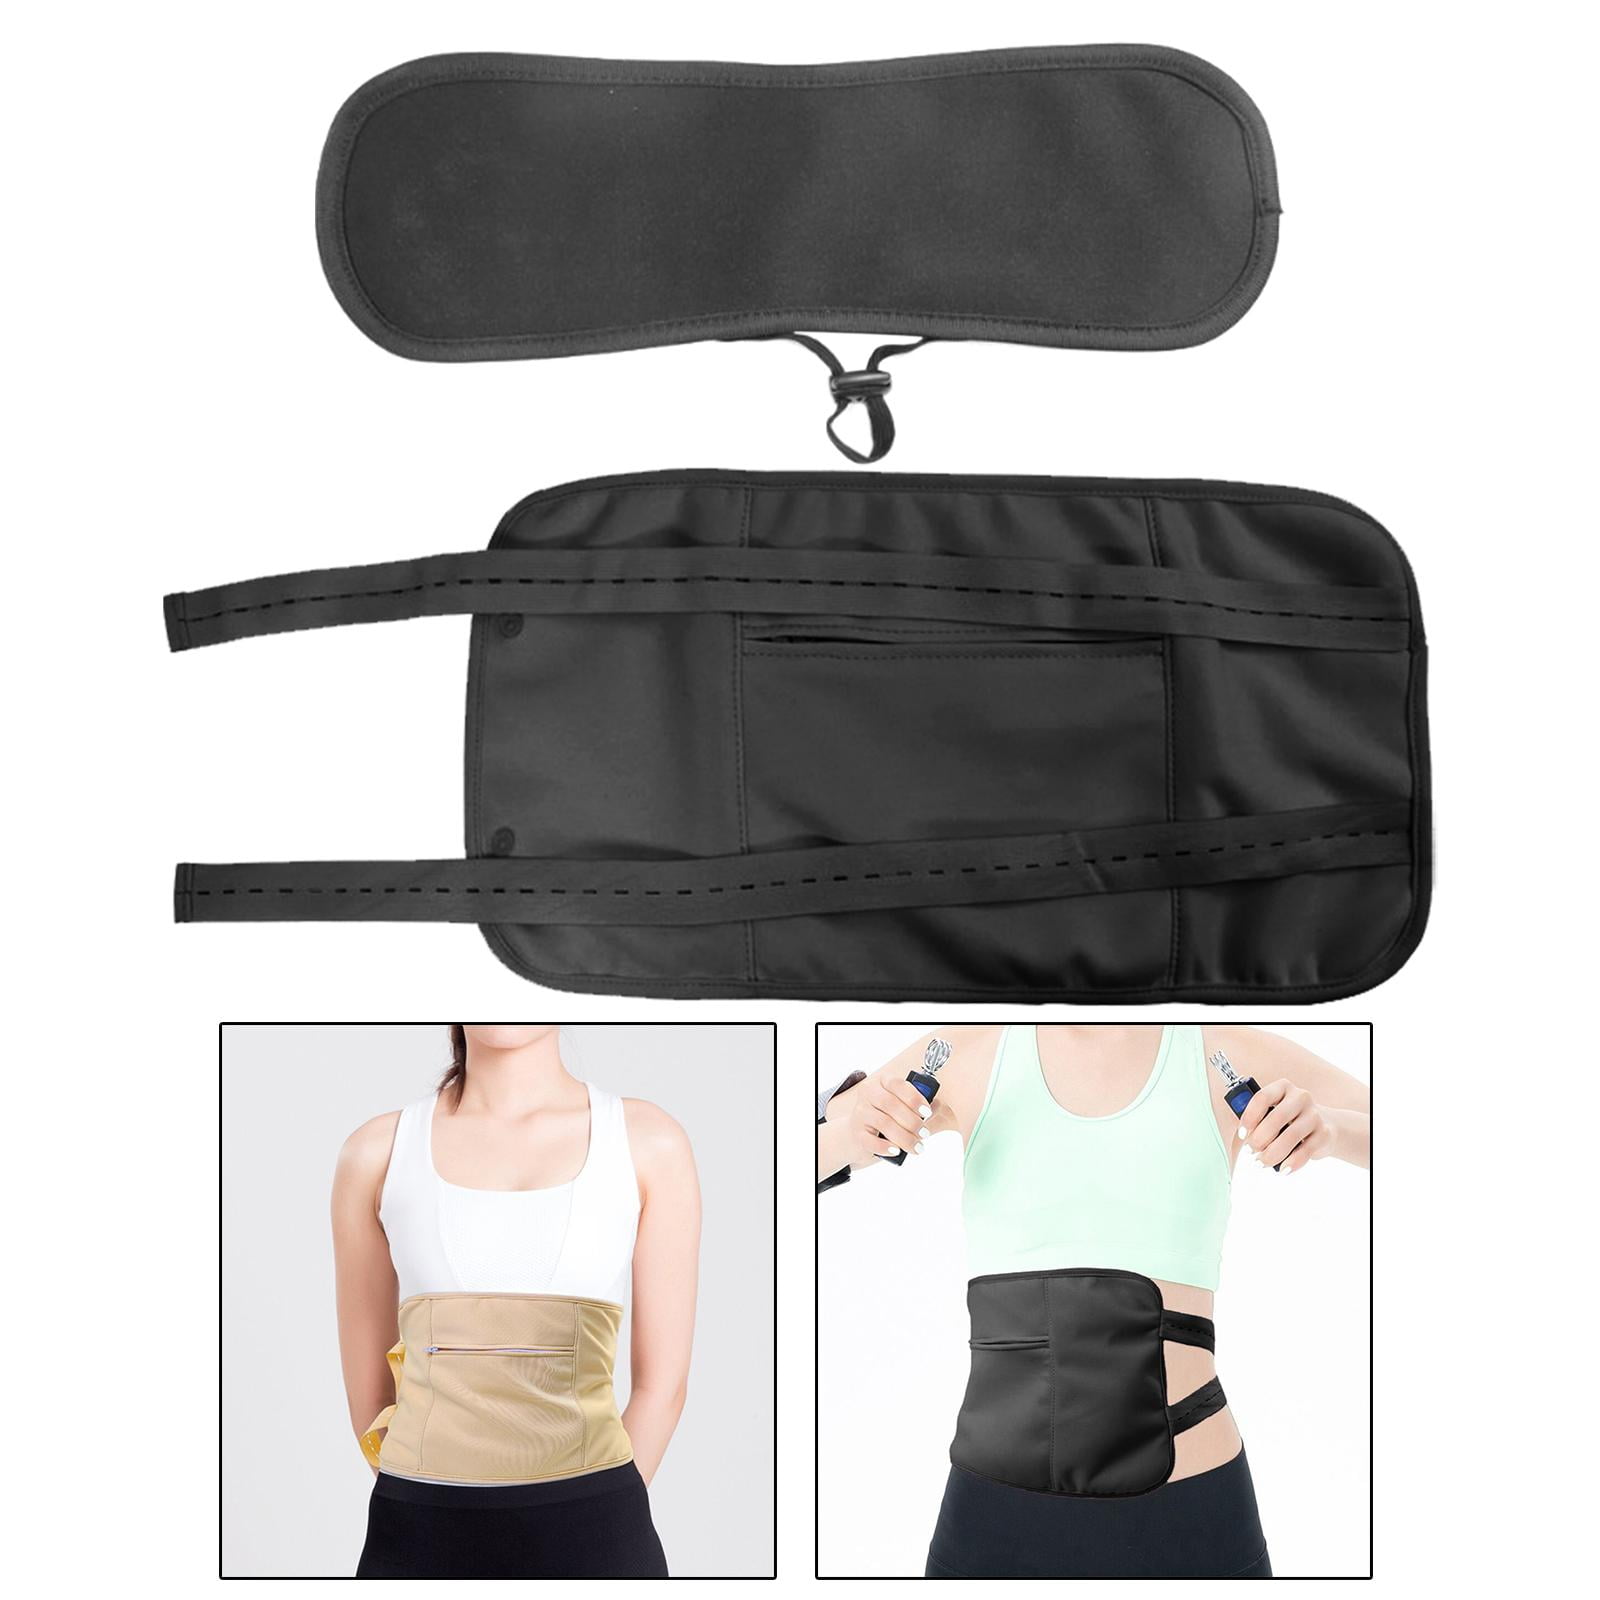 Castor Essential Oil Pack Neck Pad Waist Bag Soft Wool Sleep Conditioning  Aid Less Mess Reusable Comfort Fit Oxford Cotton Cloth - AliExpress